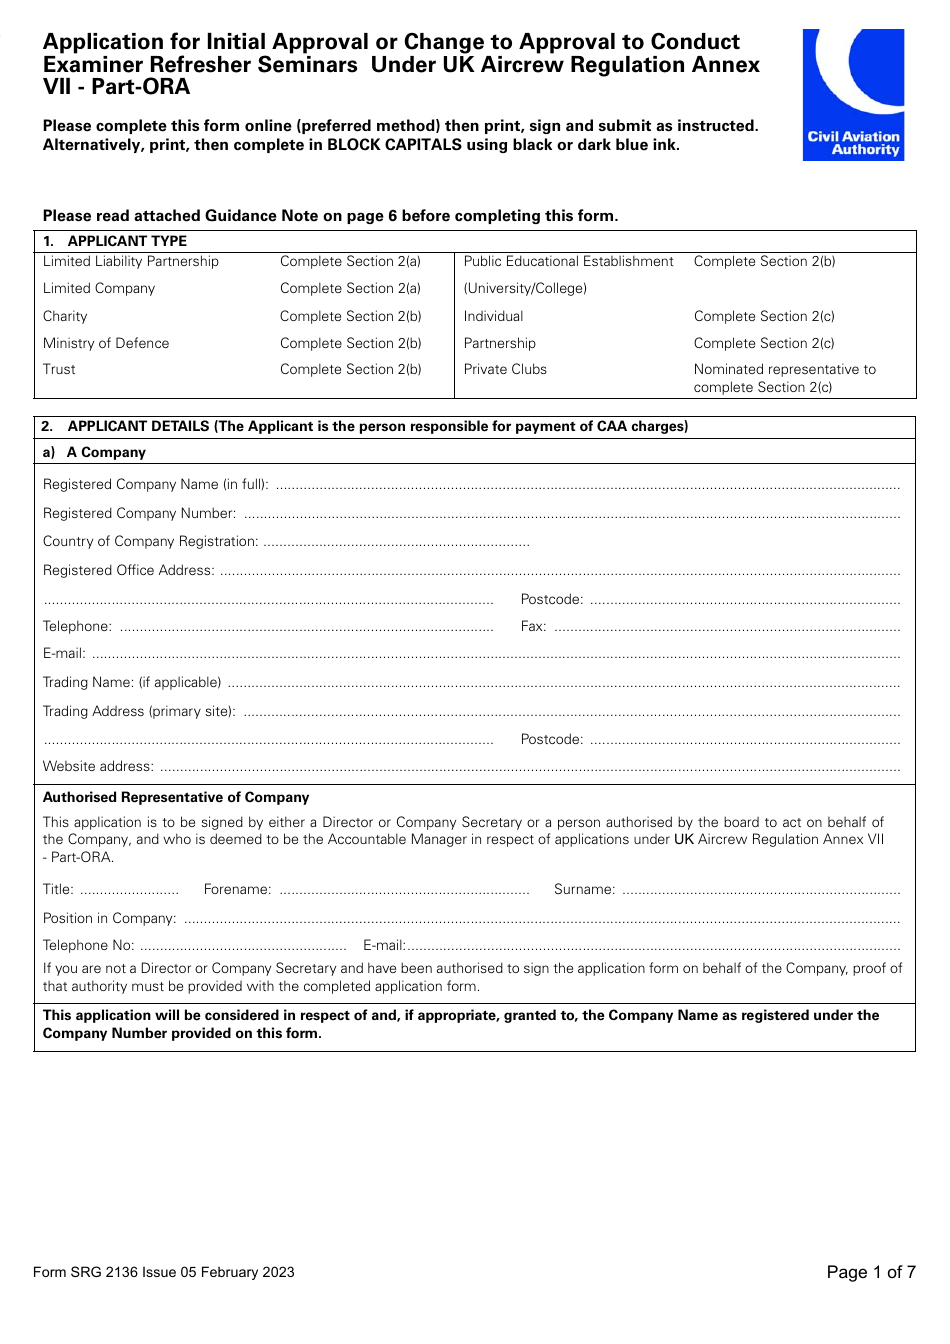 Form SRG2136 Application for Initial Approval or Change to Approval to Conduct Examiner Refresher Seminars Under UK Aircrew Regulation Annex VII - Part-Ora - United Kingdom, Page 1